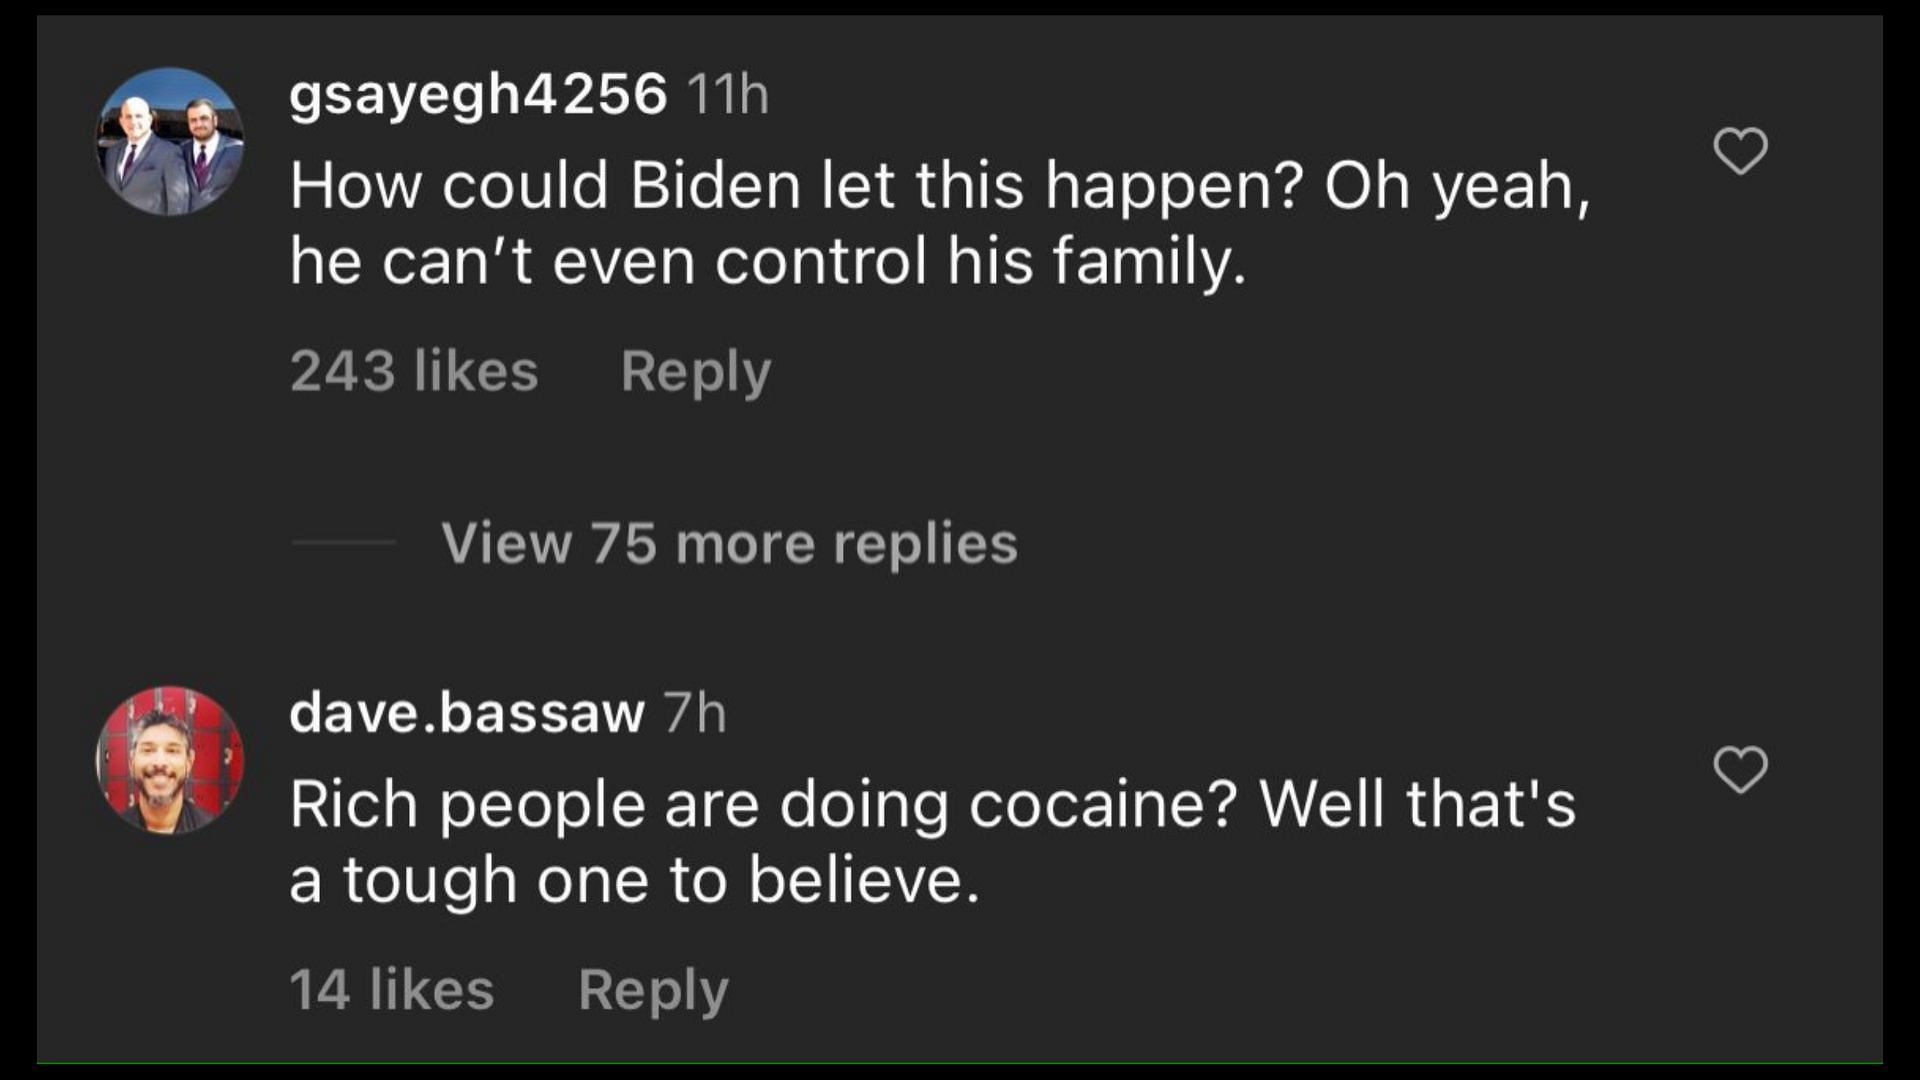 Screenshot of Internet users remarking on cocaine being found in the official residence of the President. (Photo via @Pubity/Instagram)